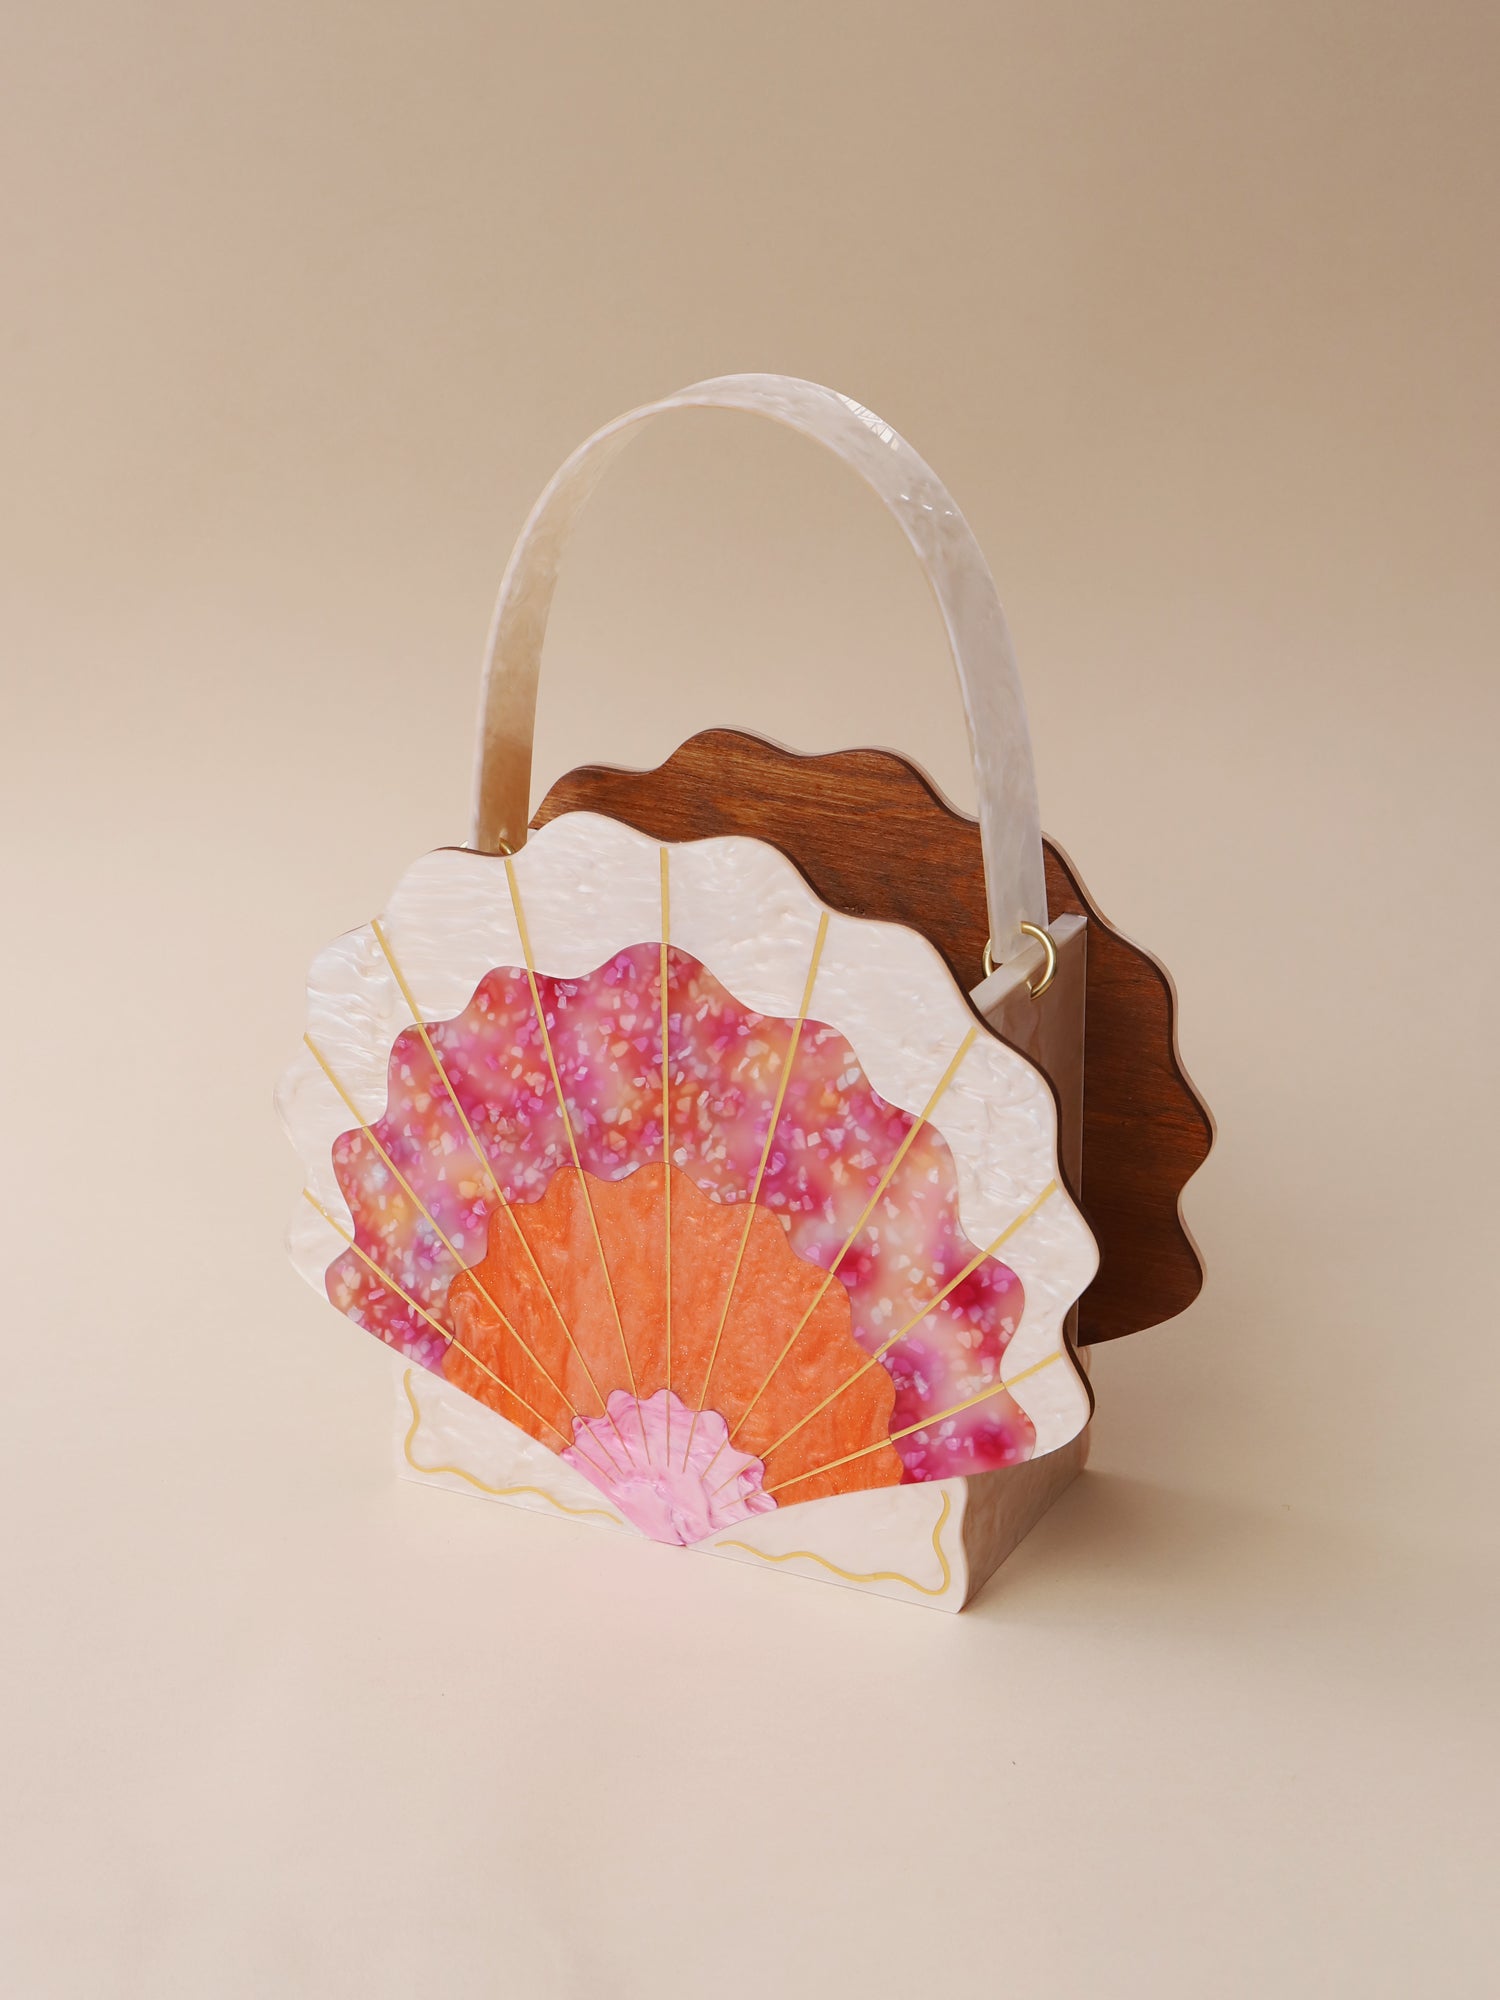 Scallop Shell Bag in Sunset